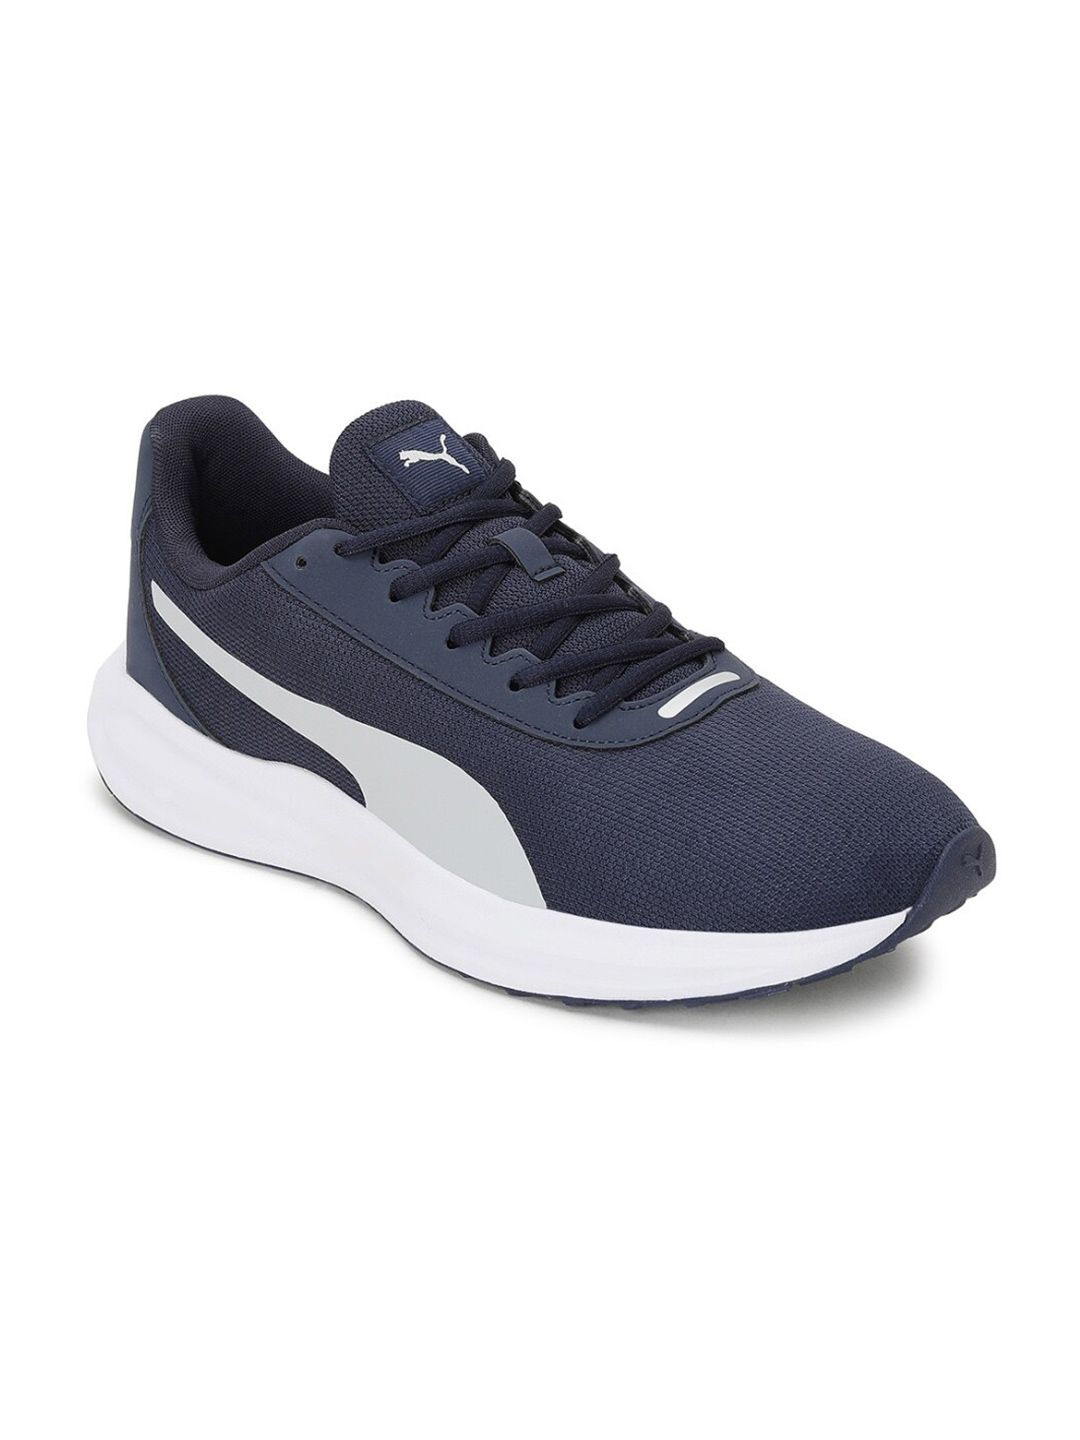 Puma Unisex Navy Blue Textile Running Shoes Price in India